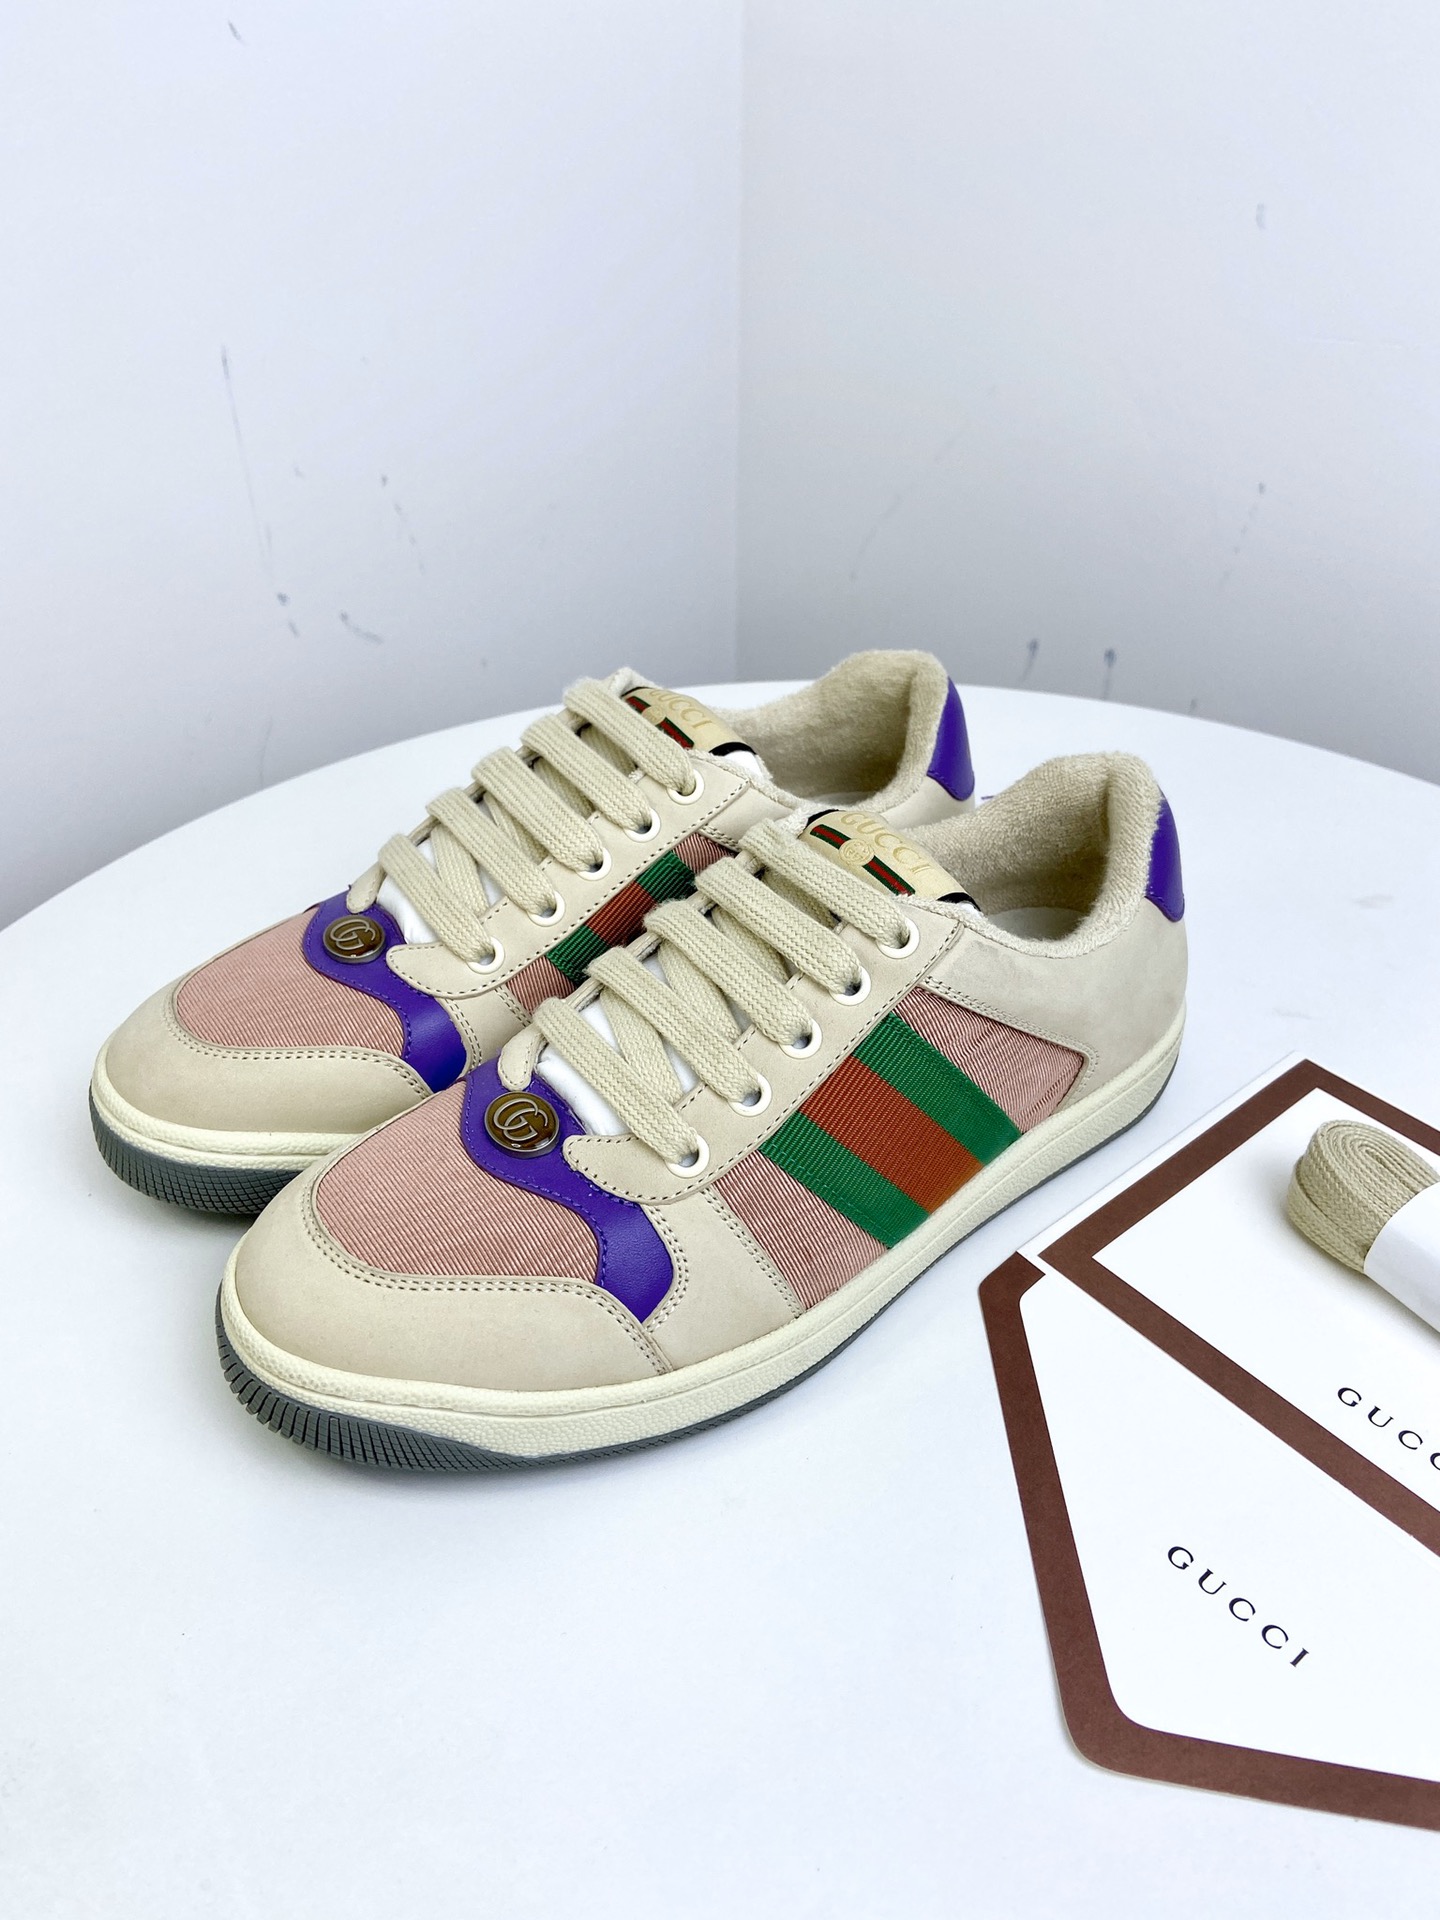 Gucci Skateboard Shoes Splicing Women Cowhide TPU Spring Collection Fashion Casual